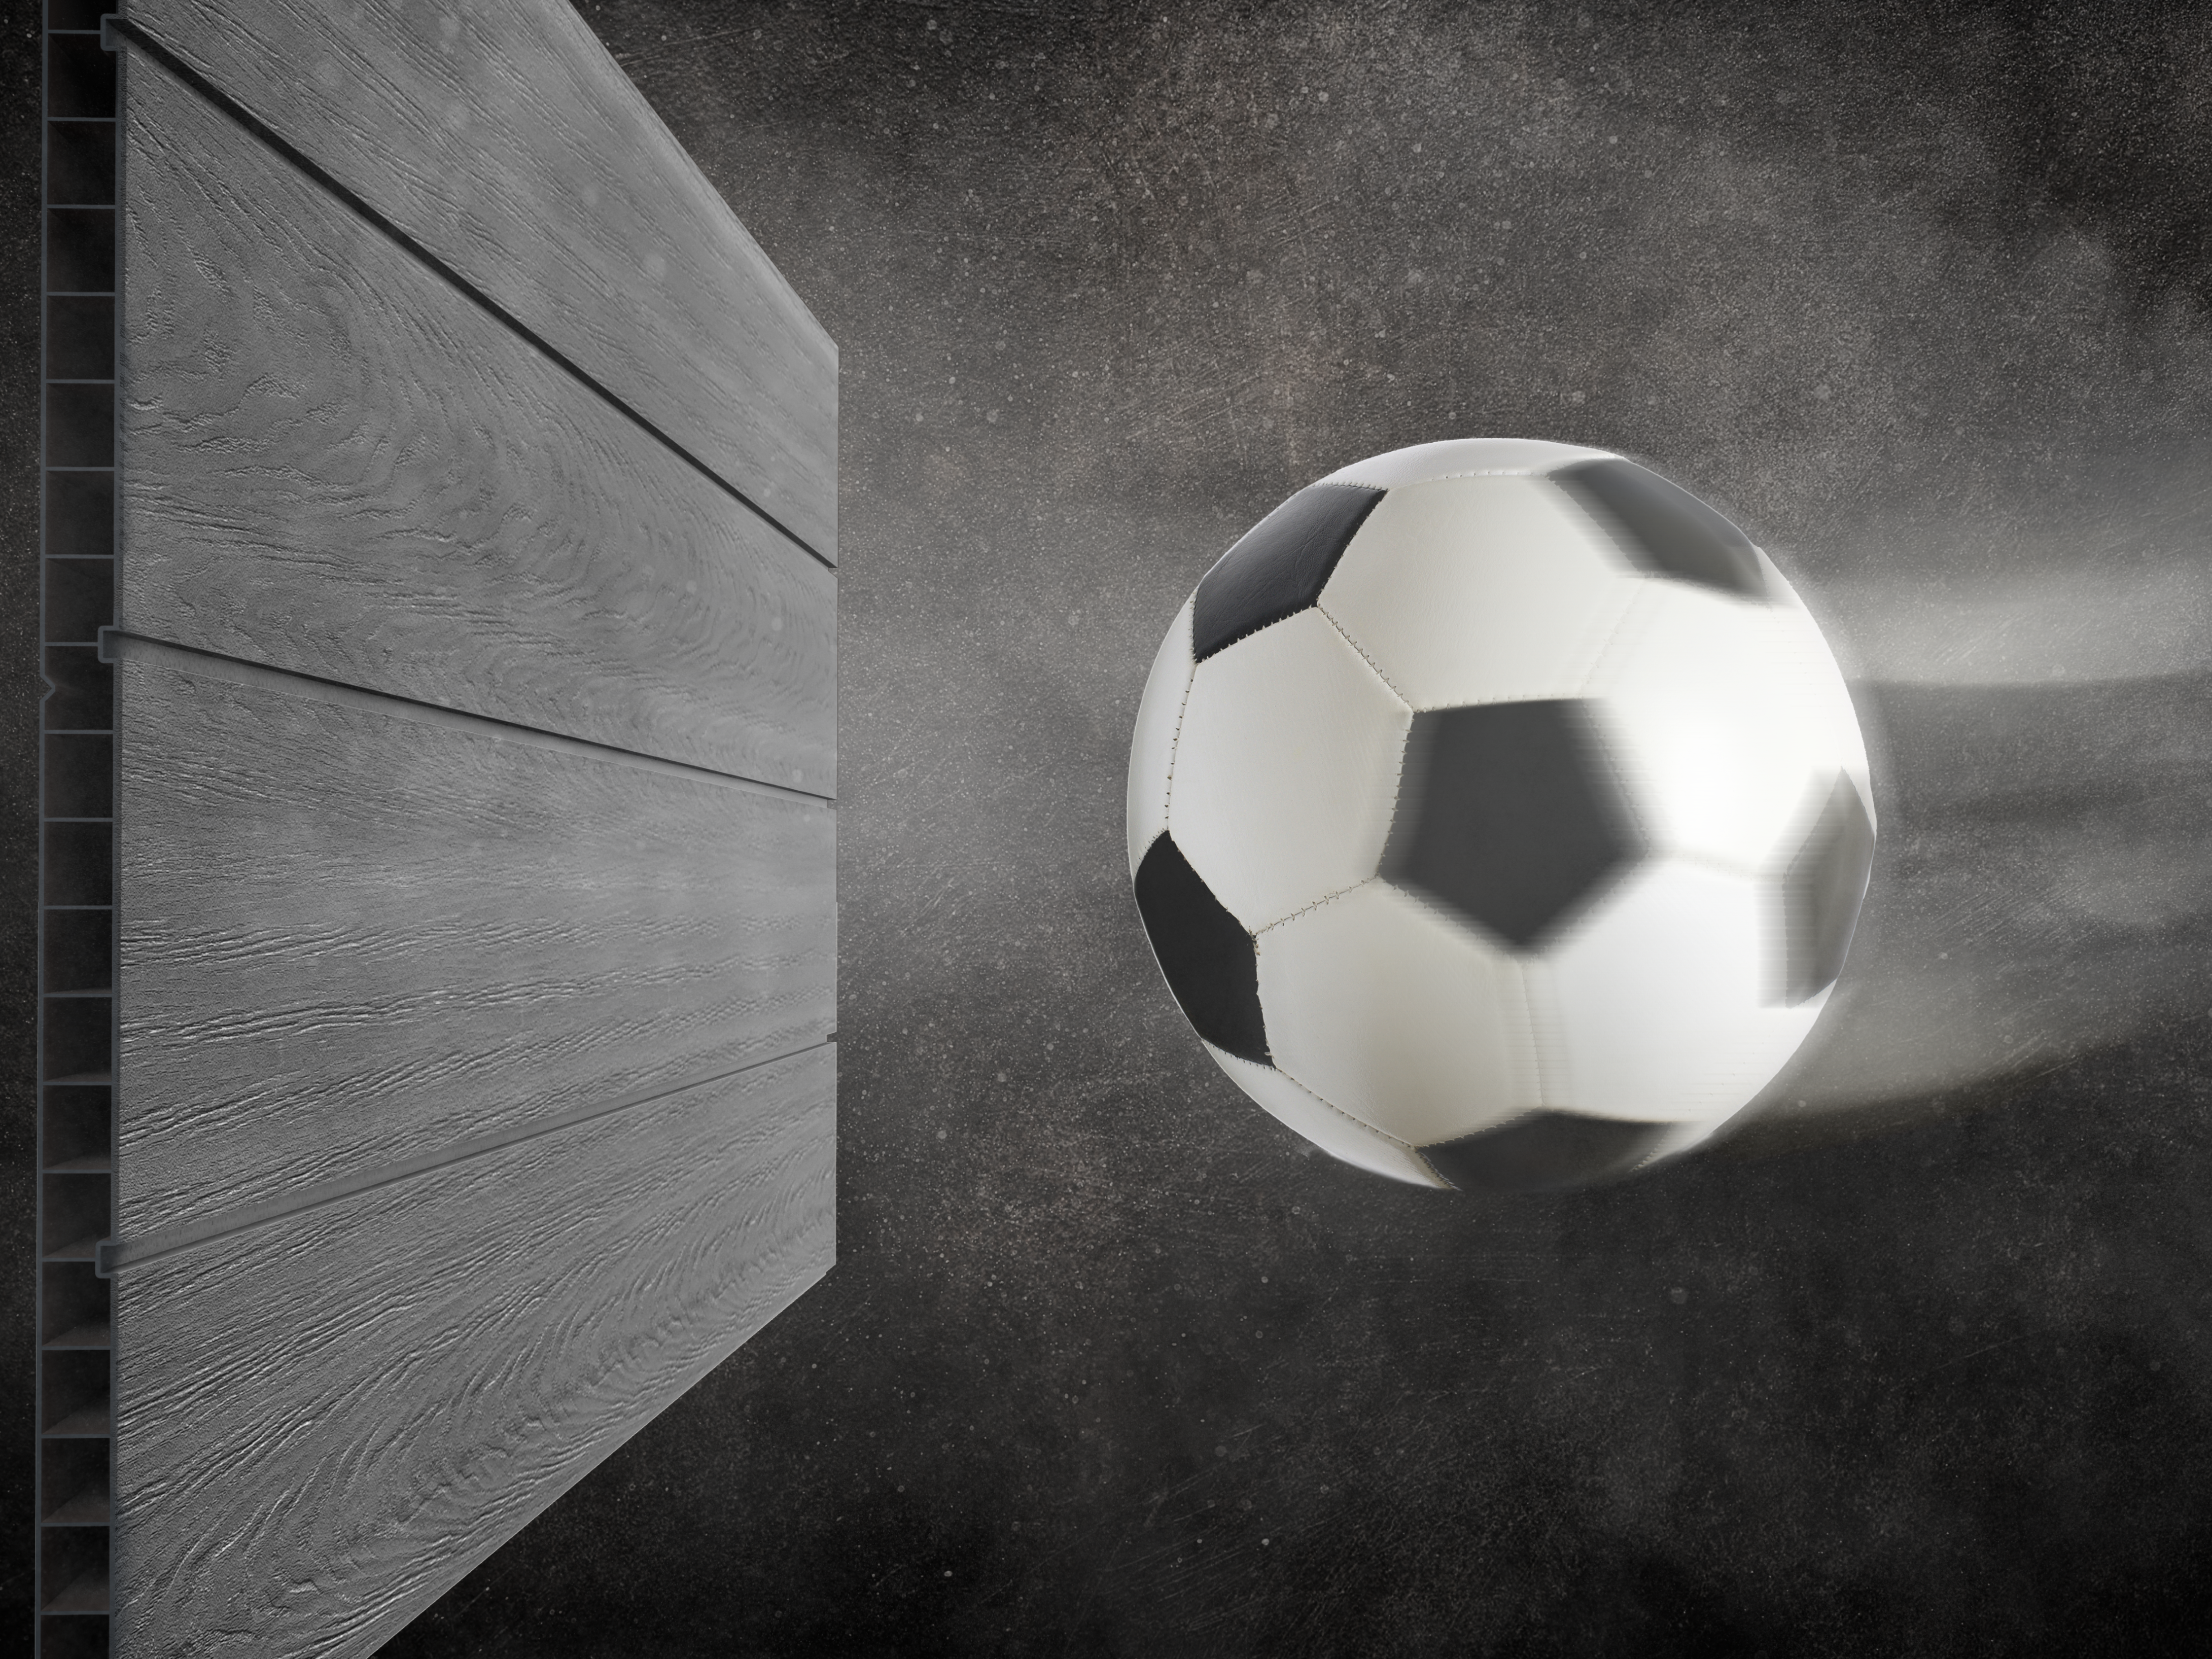 Evotech_wall_panel_with-soccer_ball_hitting_it